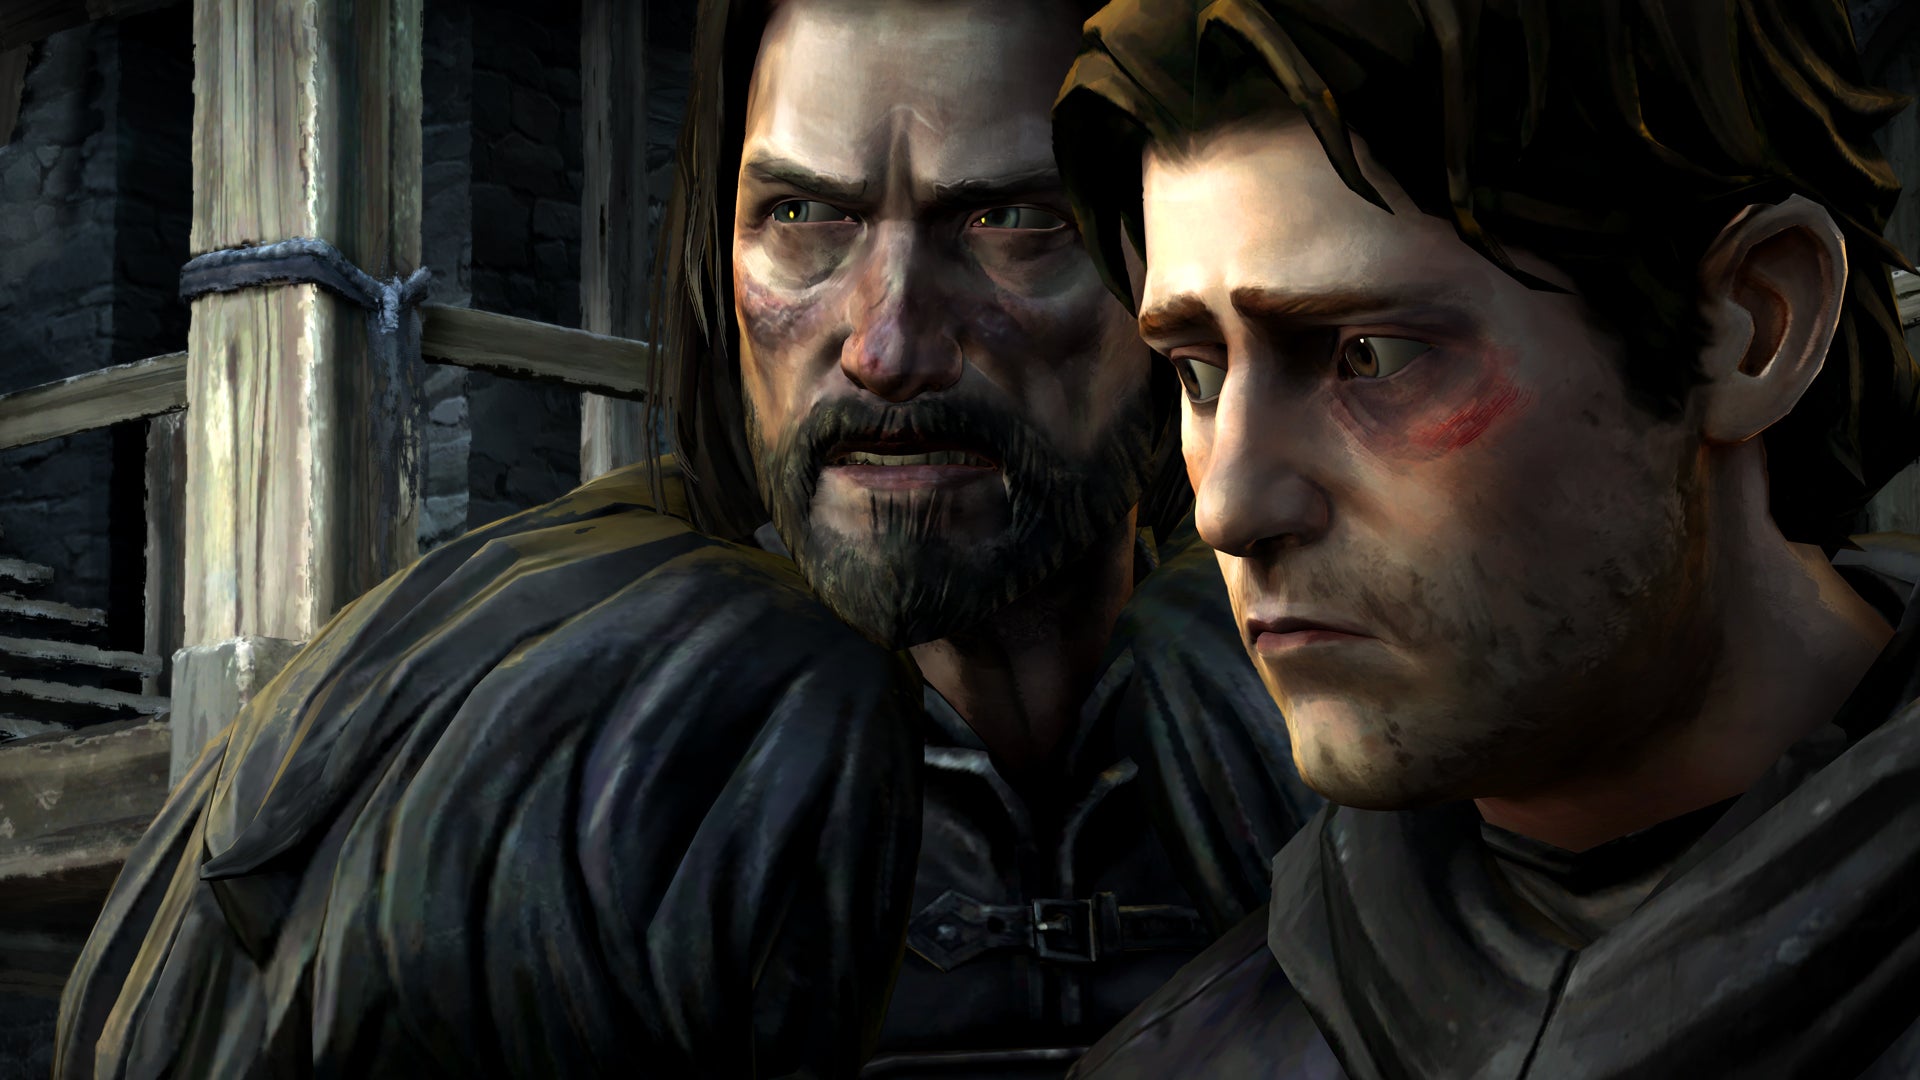 Image for Game of Thrones – Episode 4 releases today on PC, Mac, and for US PSN users